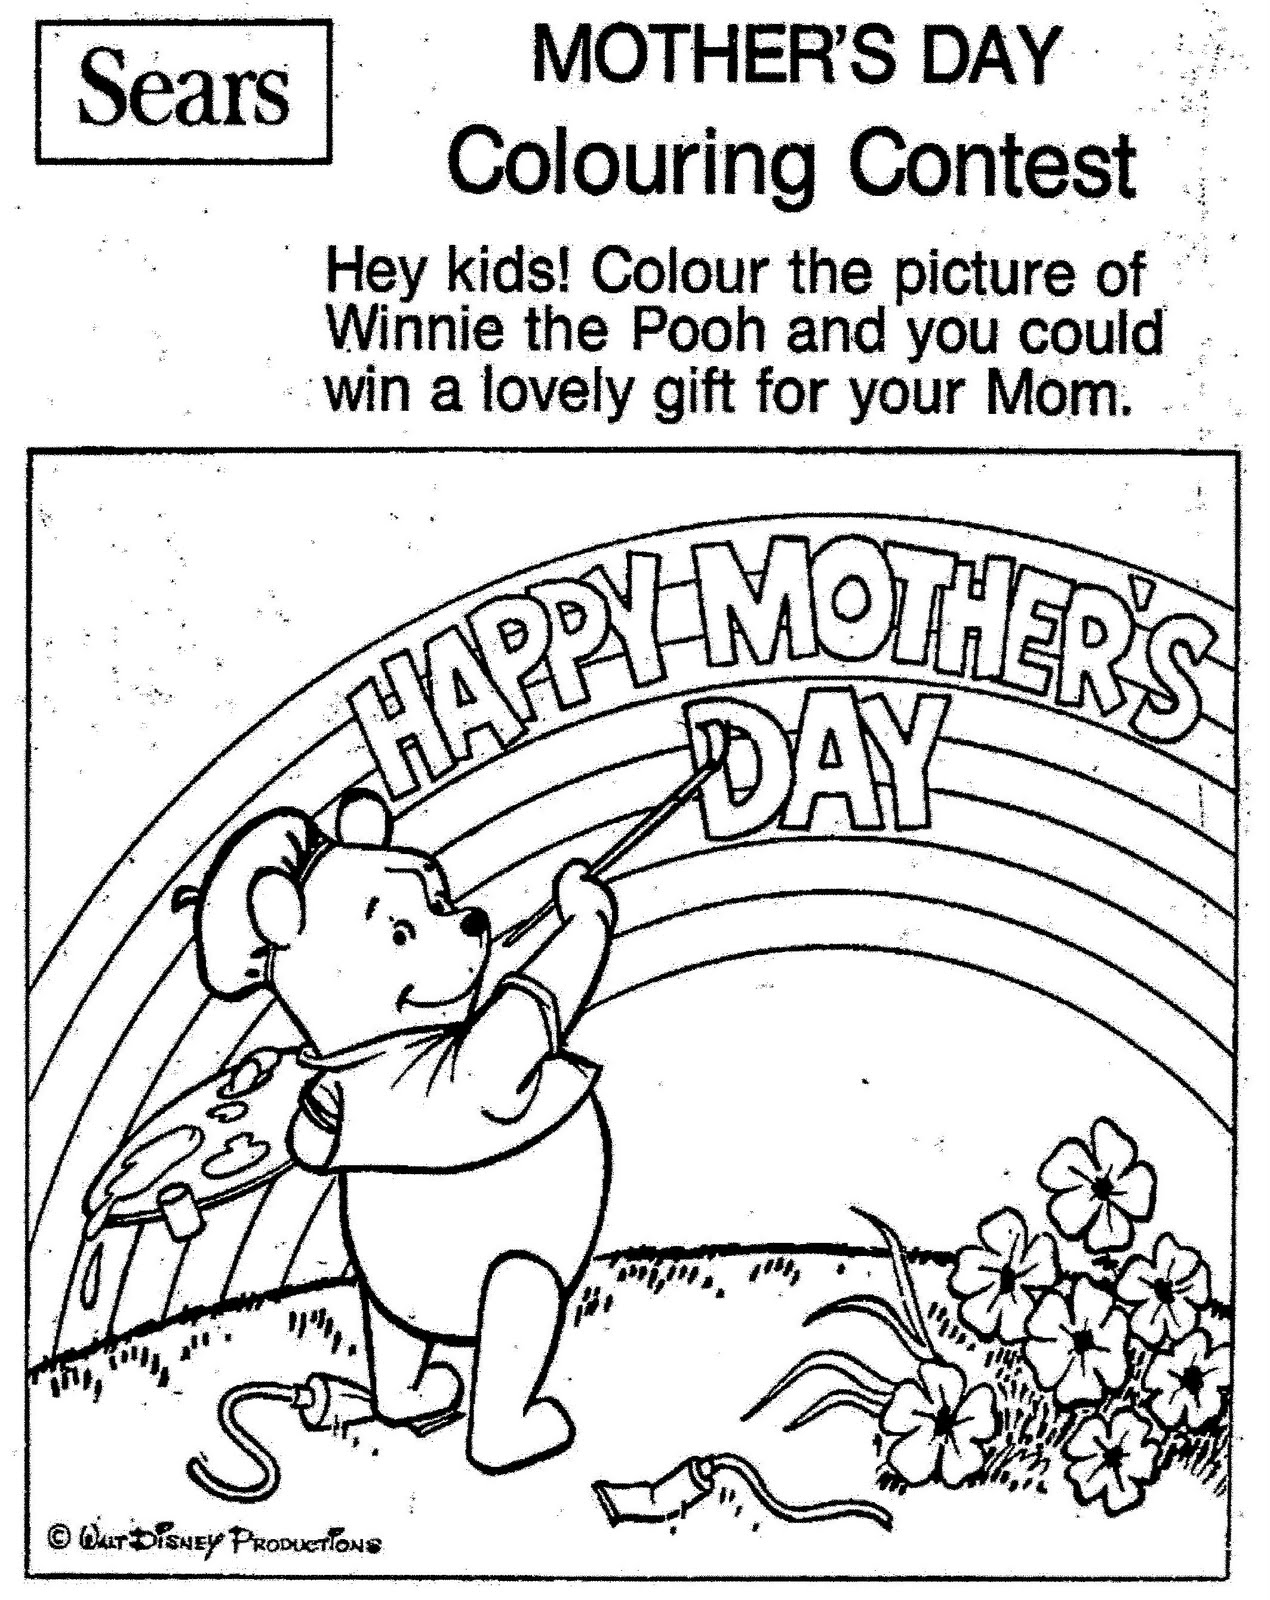 Mostly Paper Dolls: Happy Mother's Day with Pooh Bear, 1975